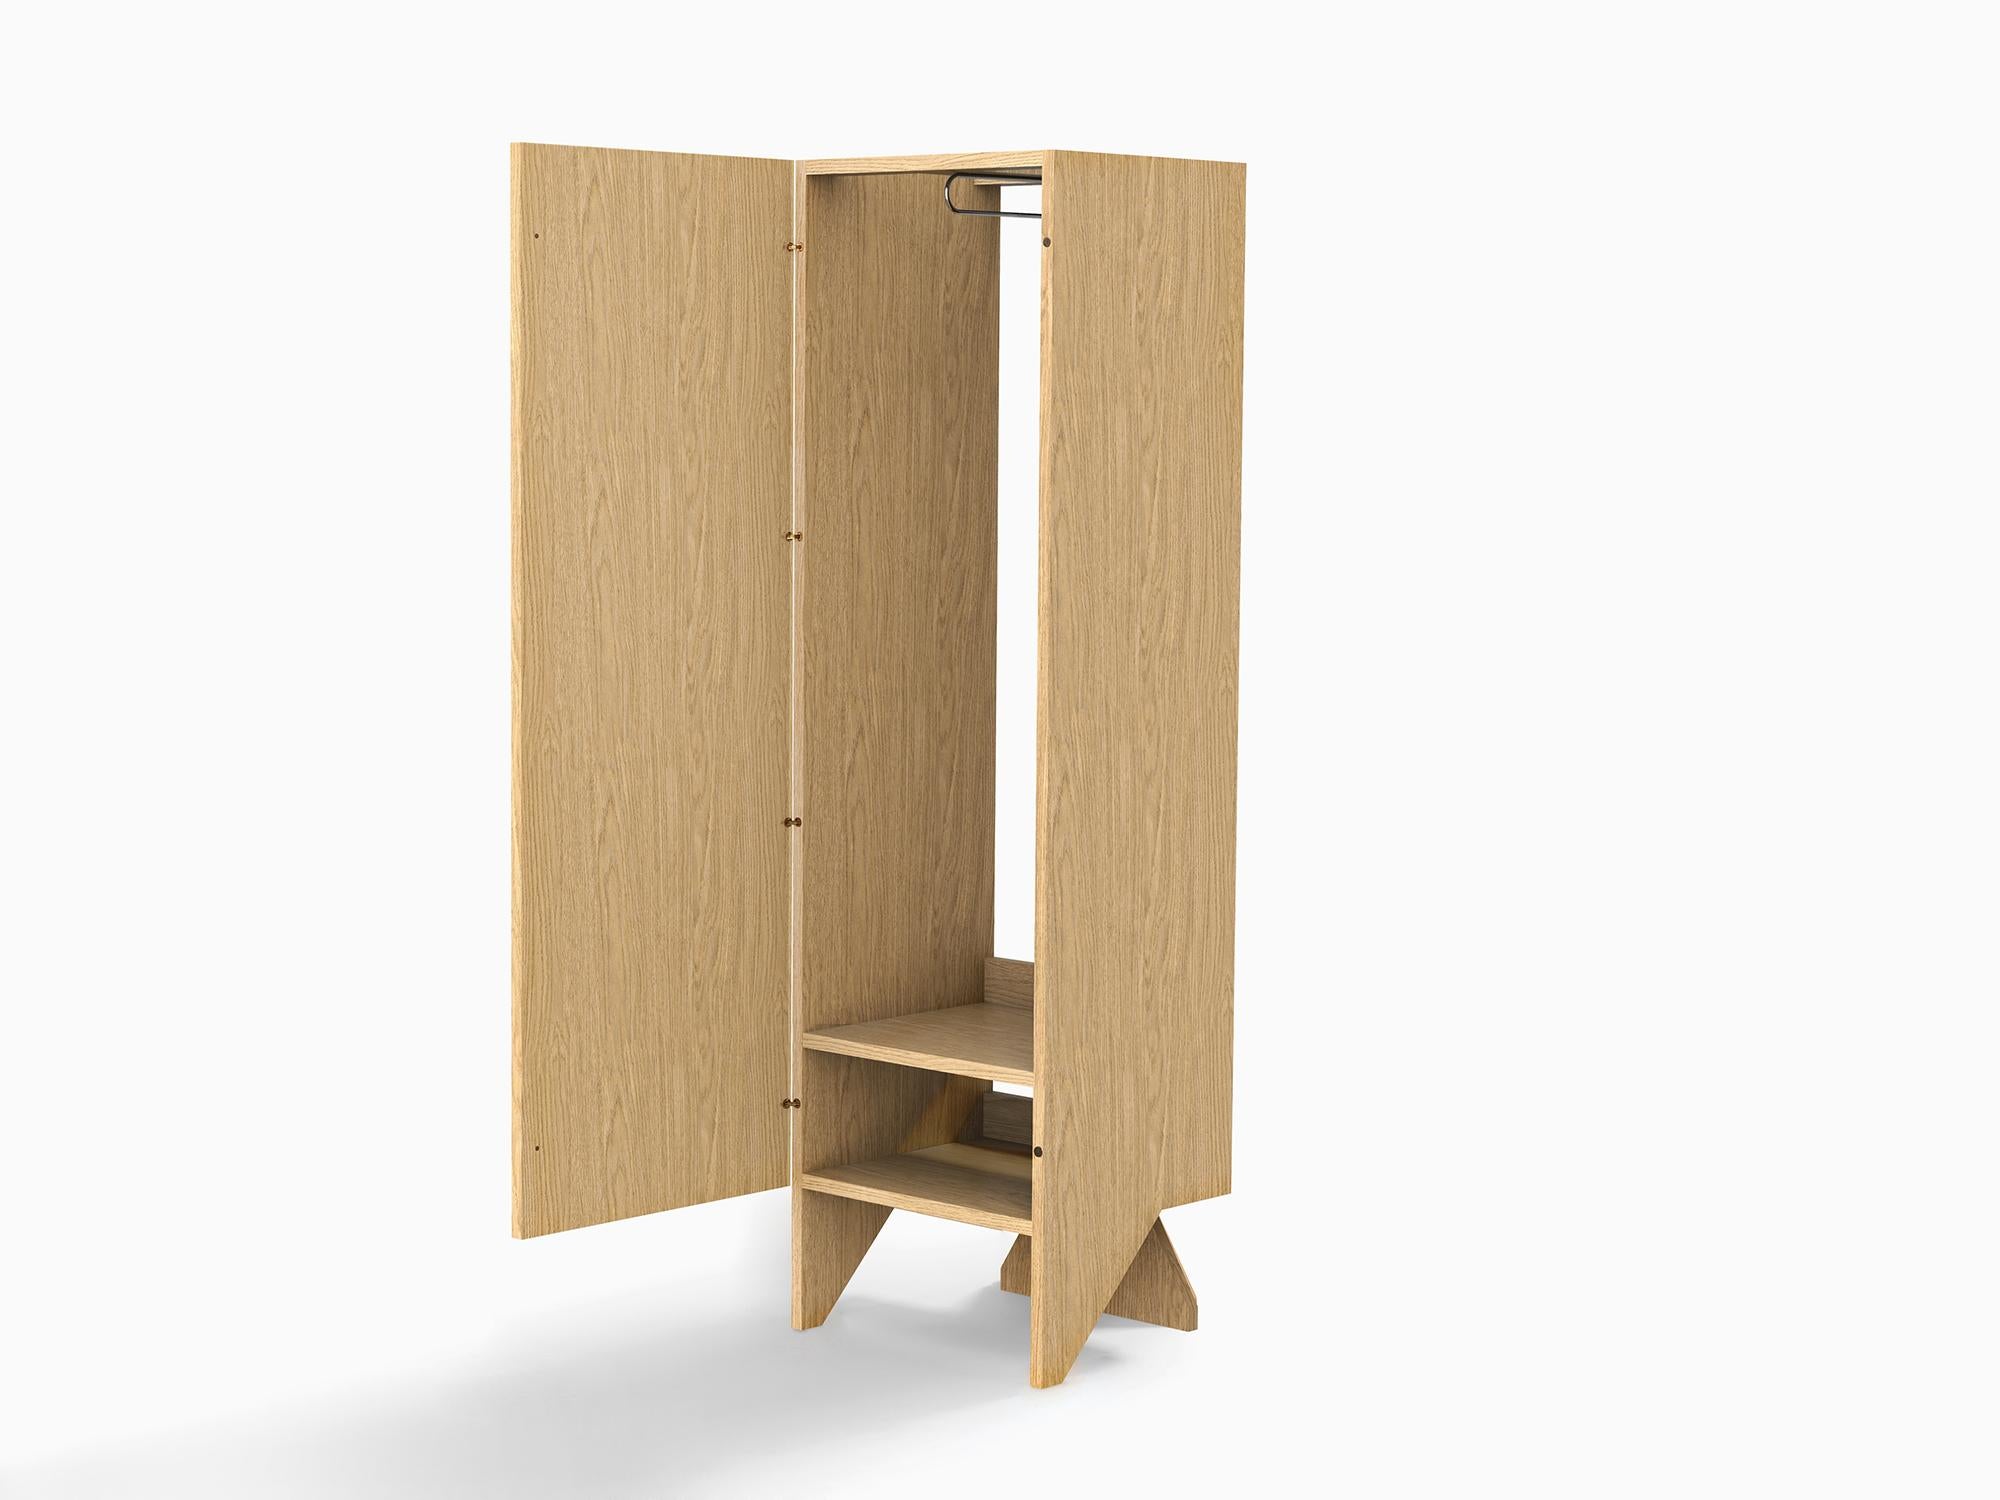 A key element for modern living is an efficient use of space. The less area we use for storage, the more room will be available to other things that makes you enjoy living. ALFAMA wardrobe is, in its own unique way, Siza´s proposition to meet these